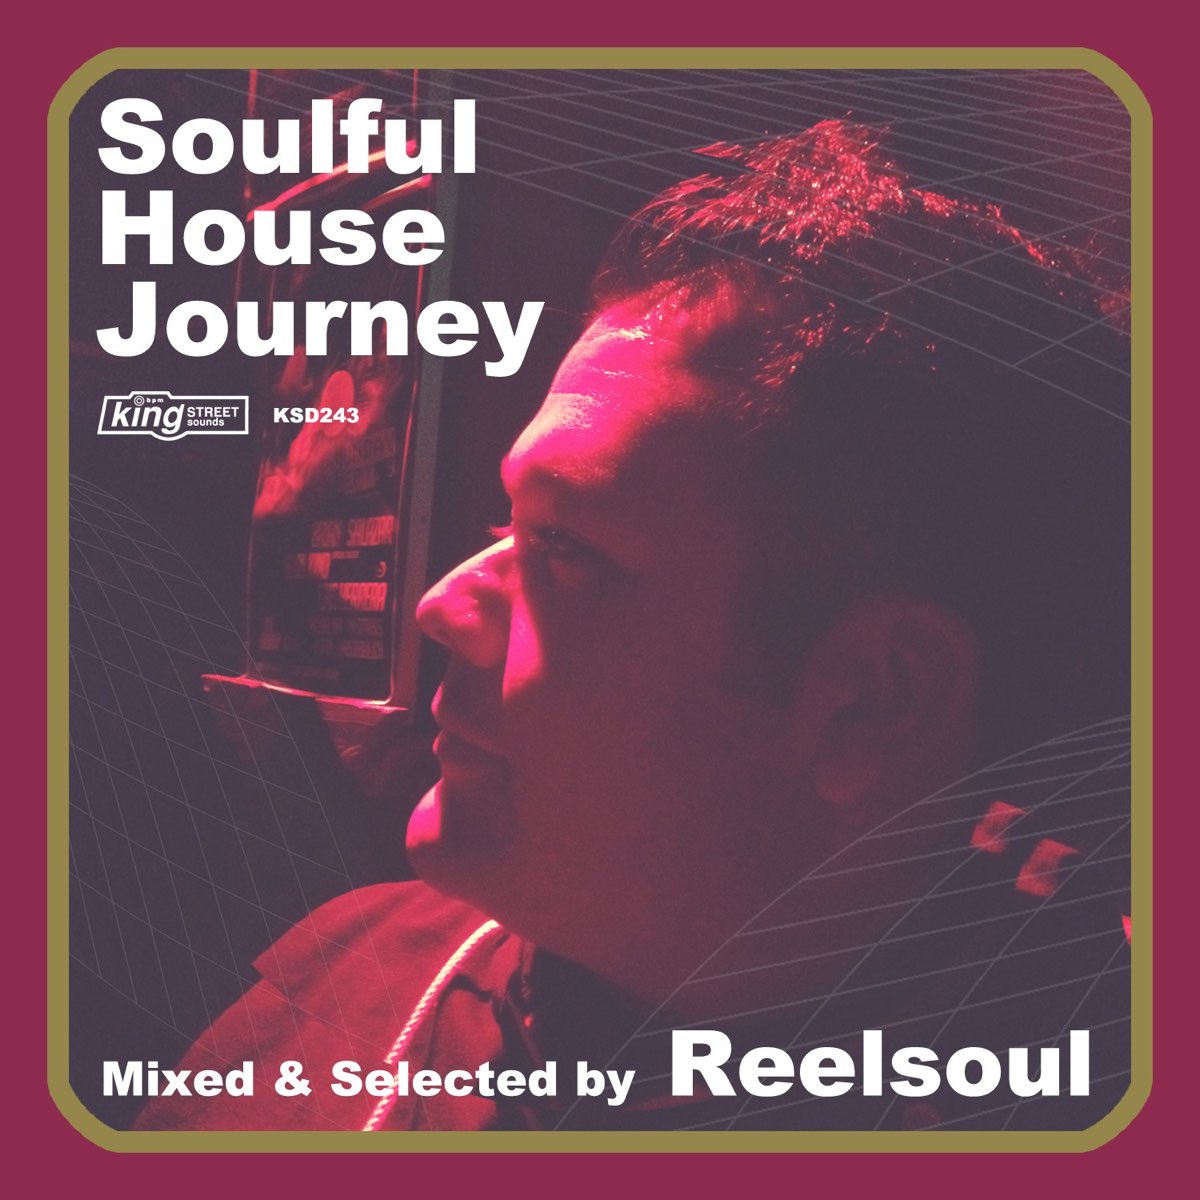 ‎Soulful House Journey (DJ Mix) by Reelsoul on Apple Music